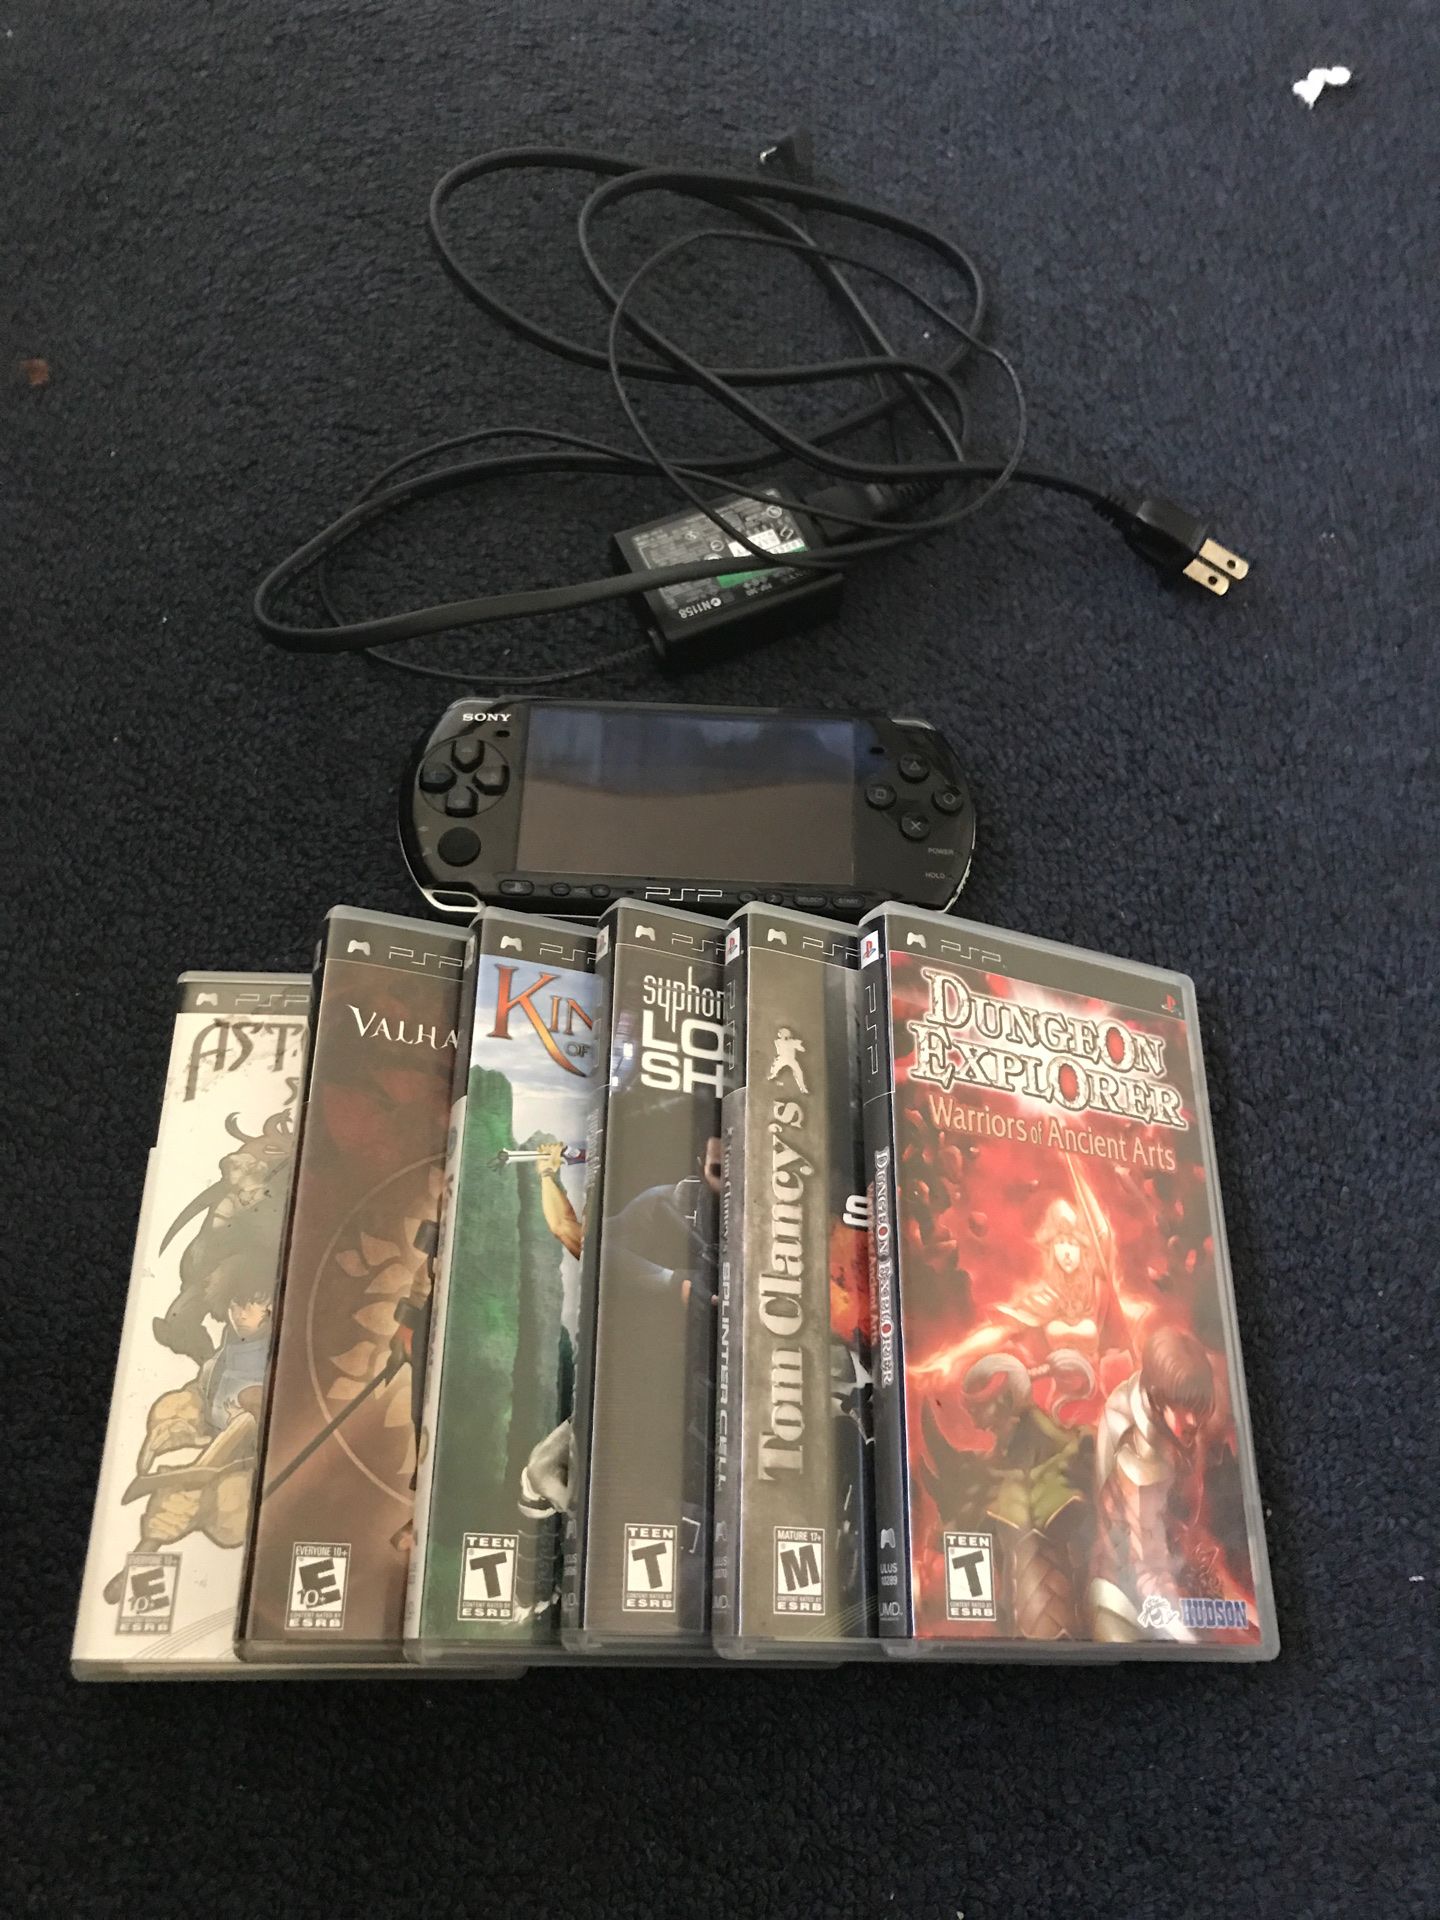 PSP and psp games